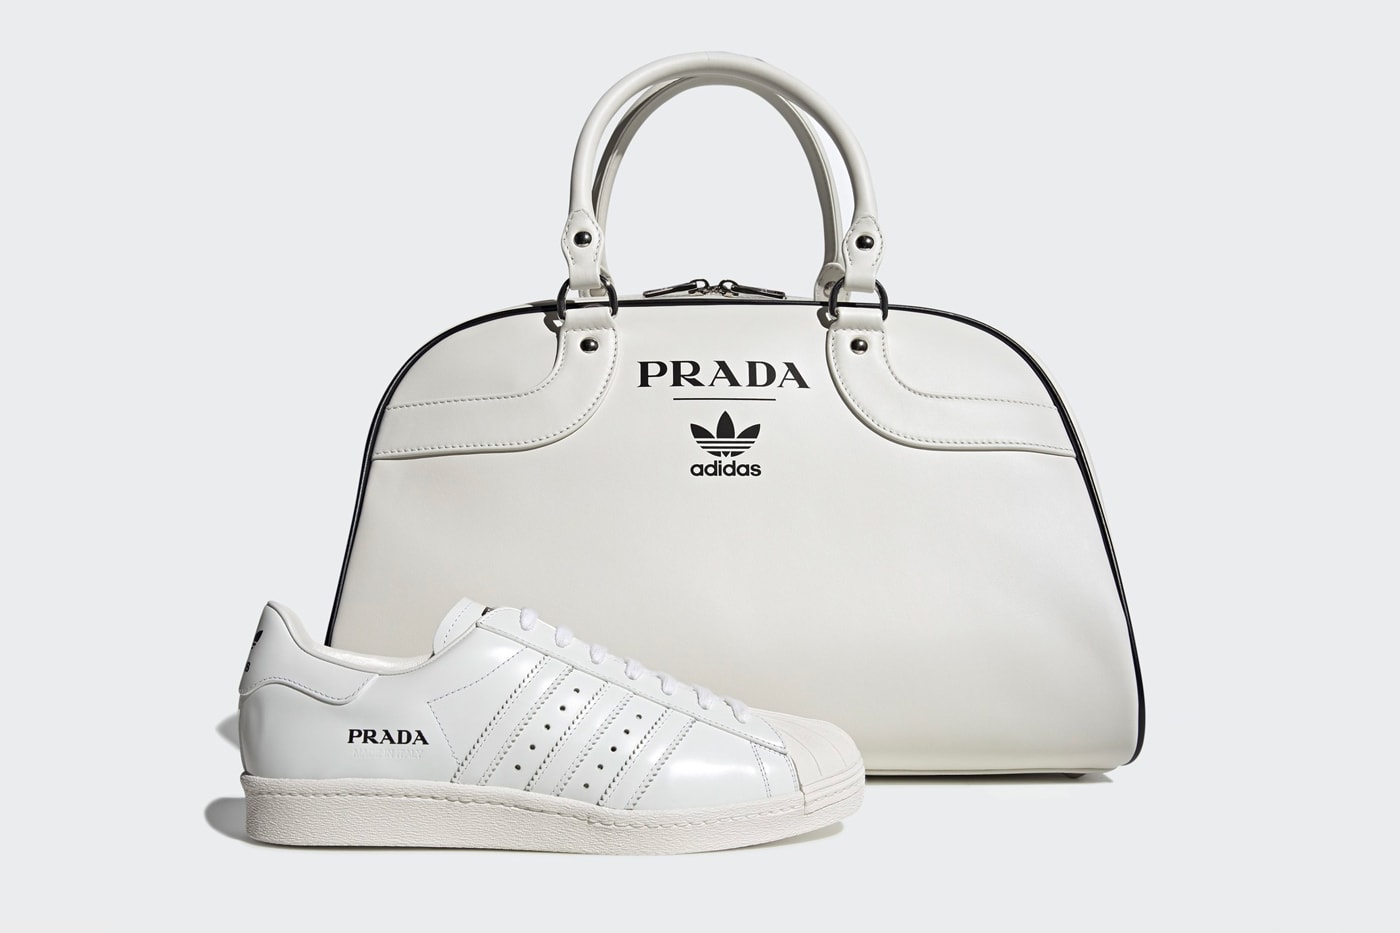 Prada Adidas Superstar & Bowling Bag First Look Release info Date Buy White Milan Limited 700 optic white